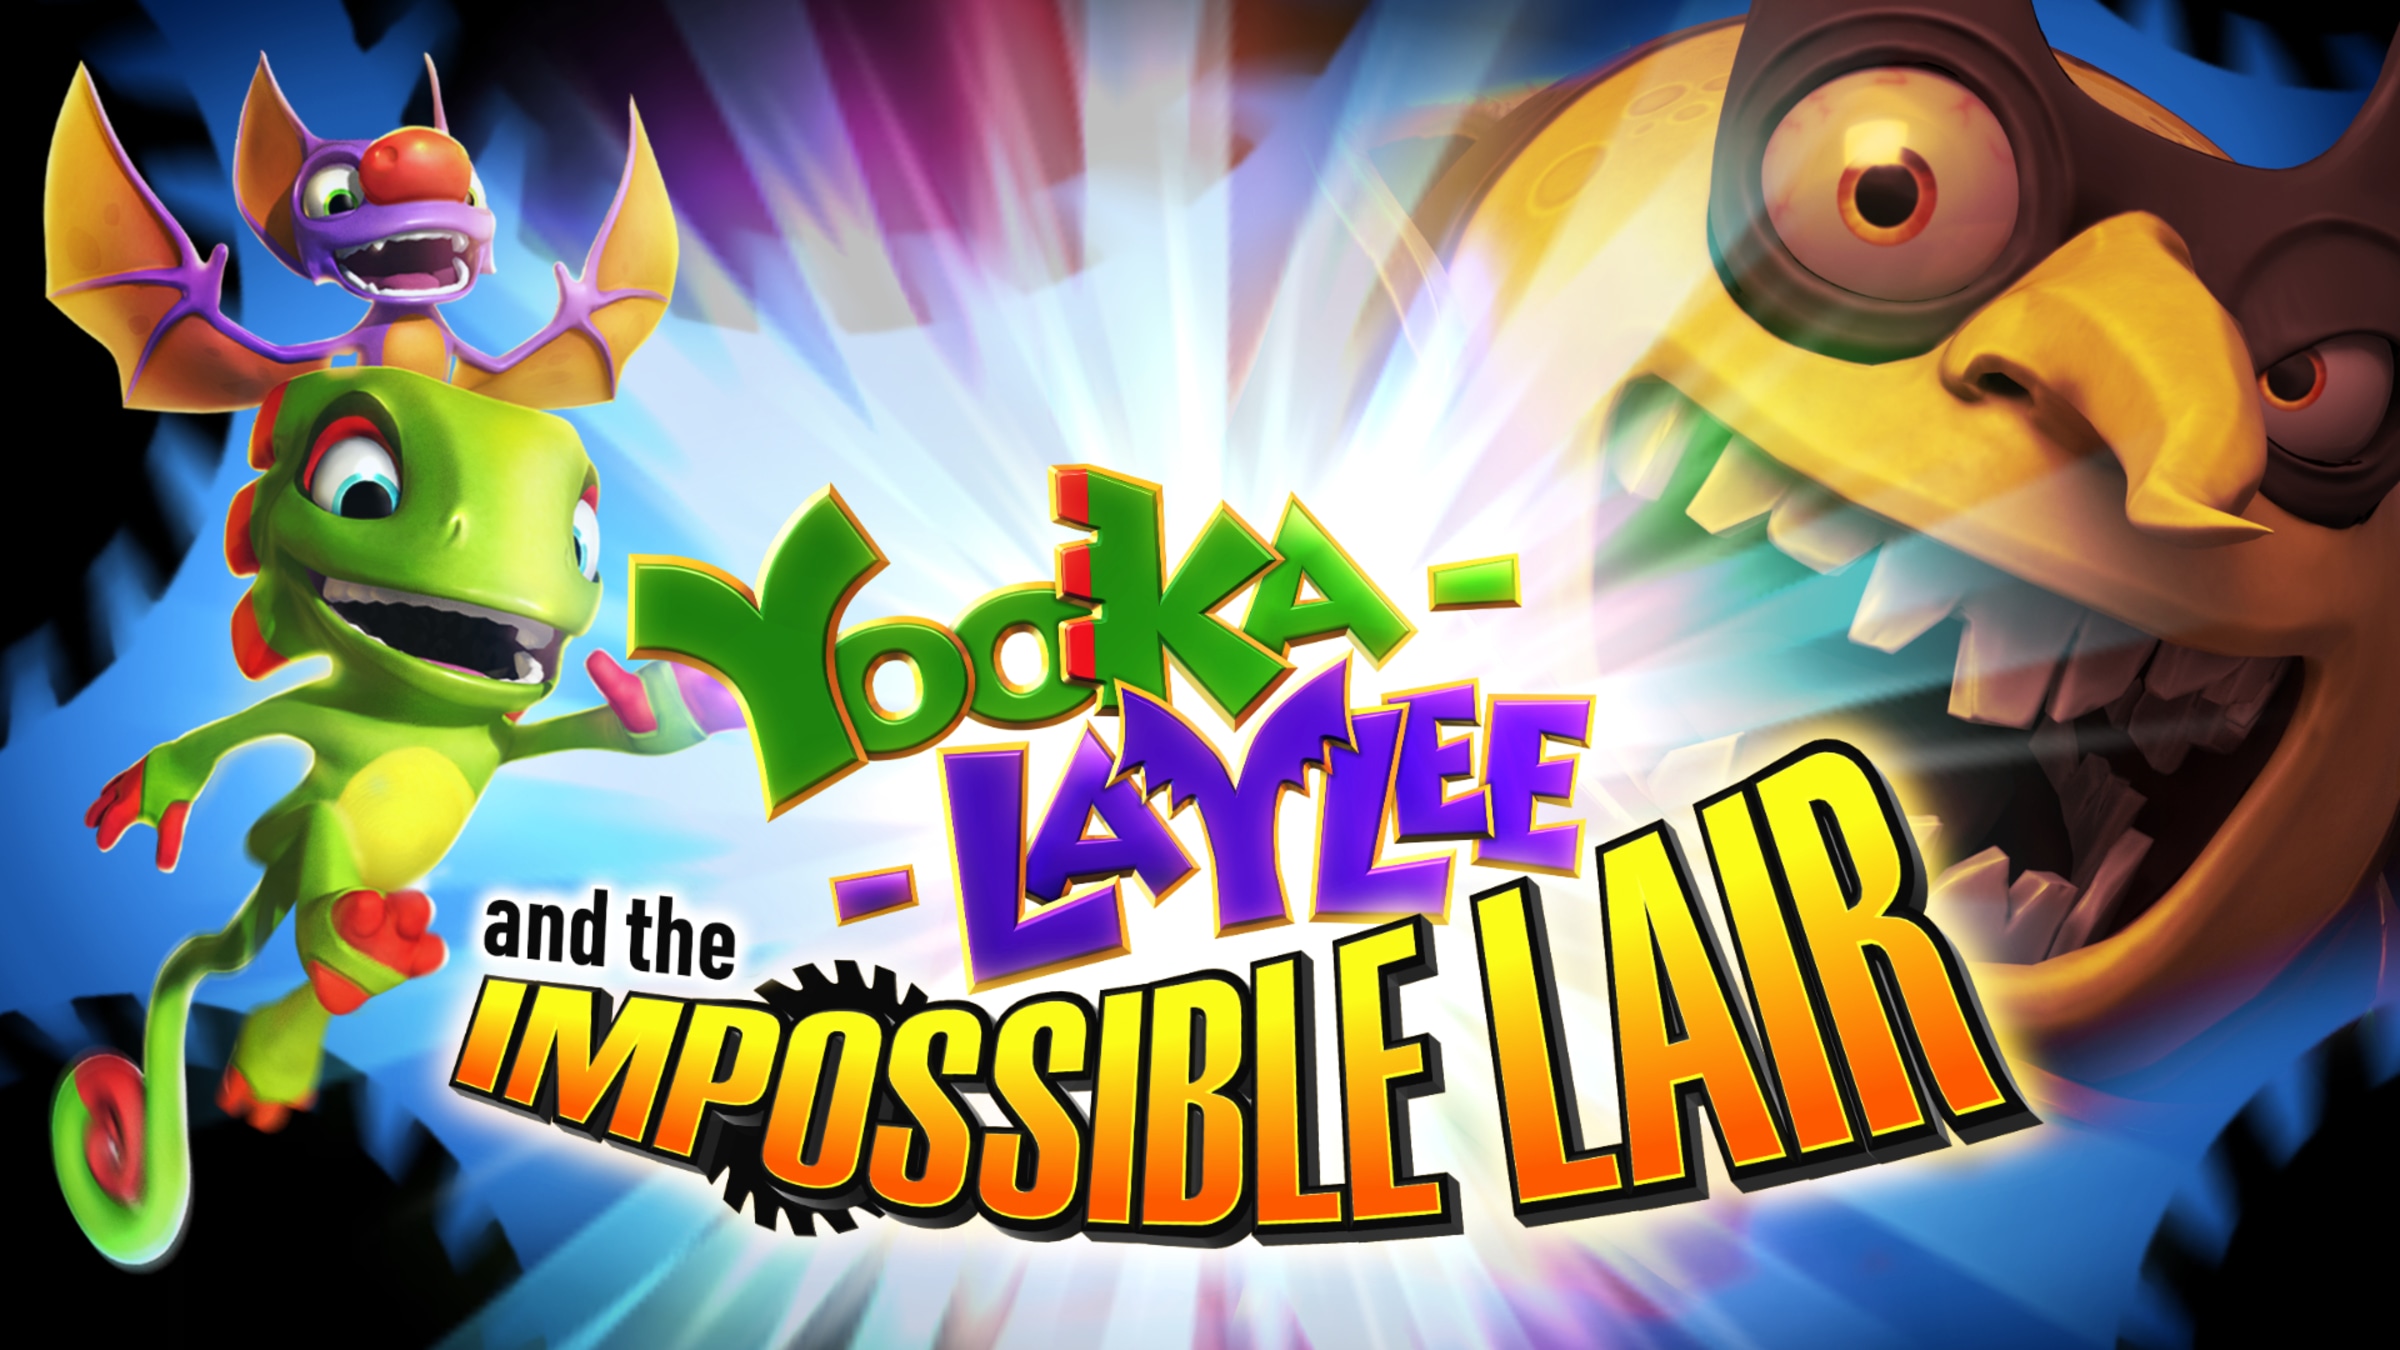 Yooka-Laylee & the Impossible Lair (Digital Download Game): Nintendo Switch $3, PC $3.50